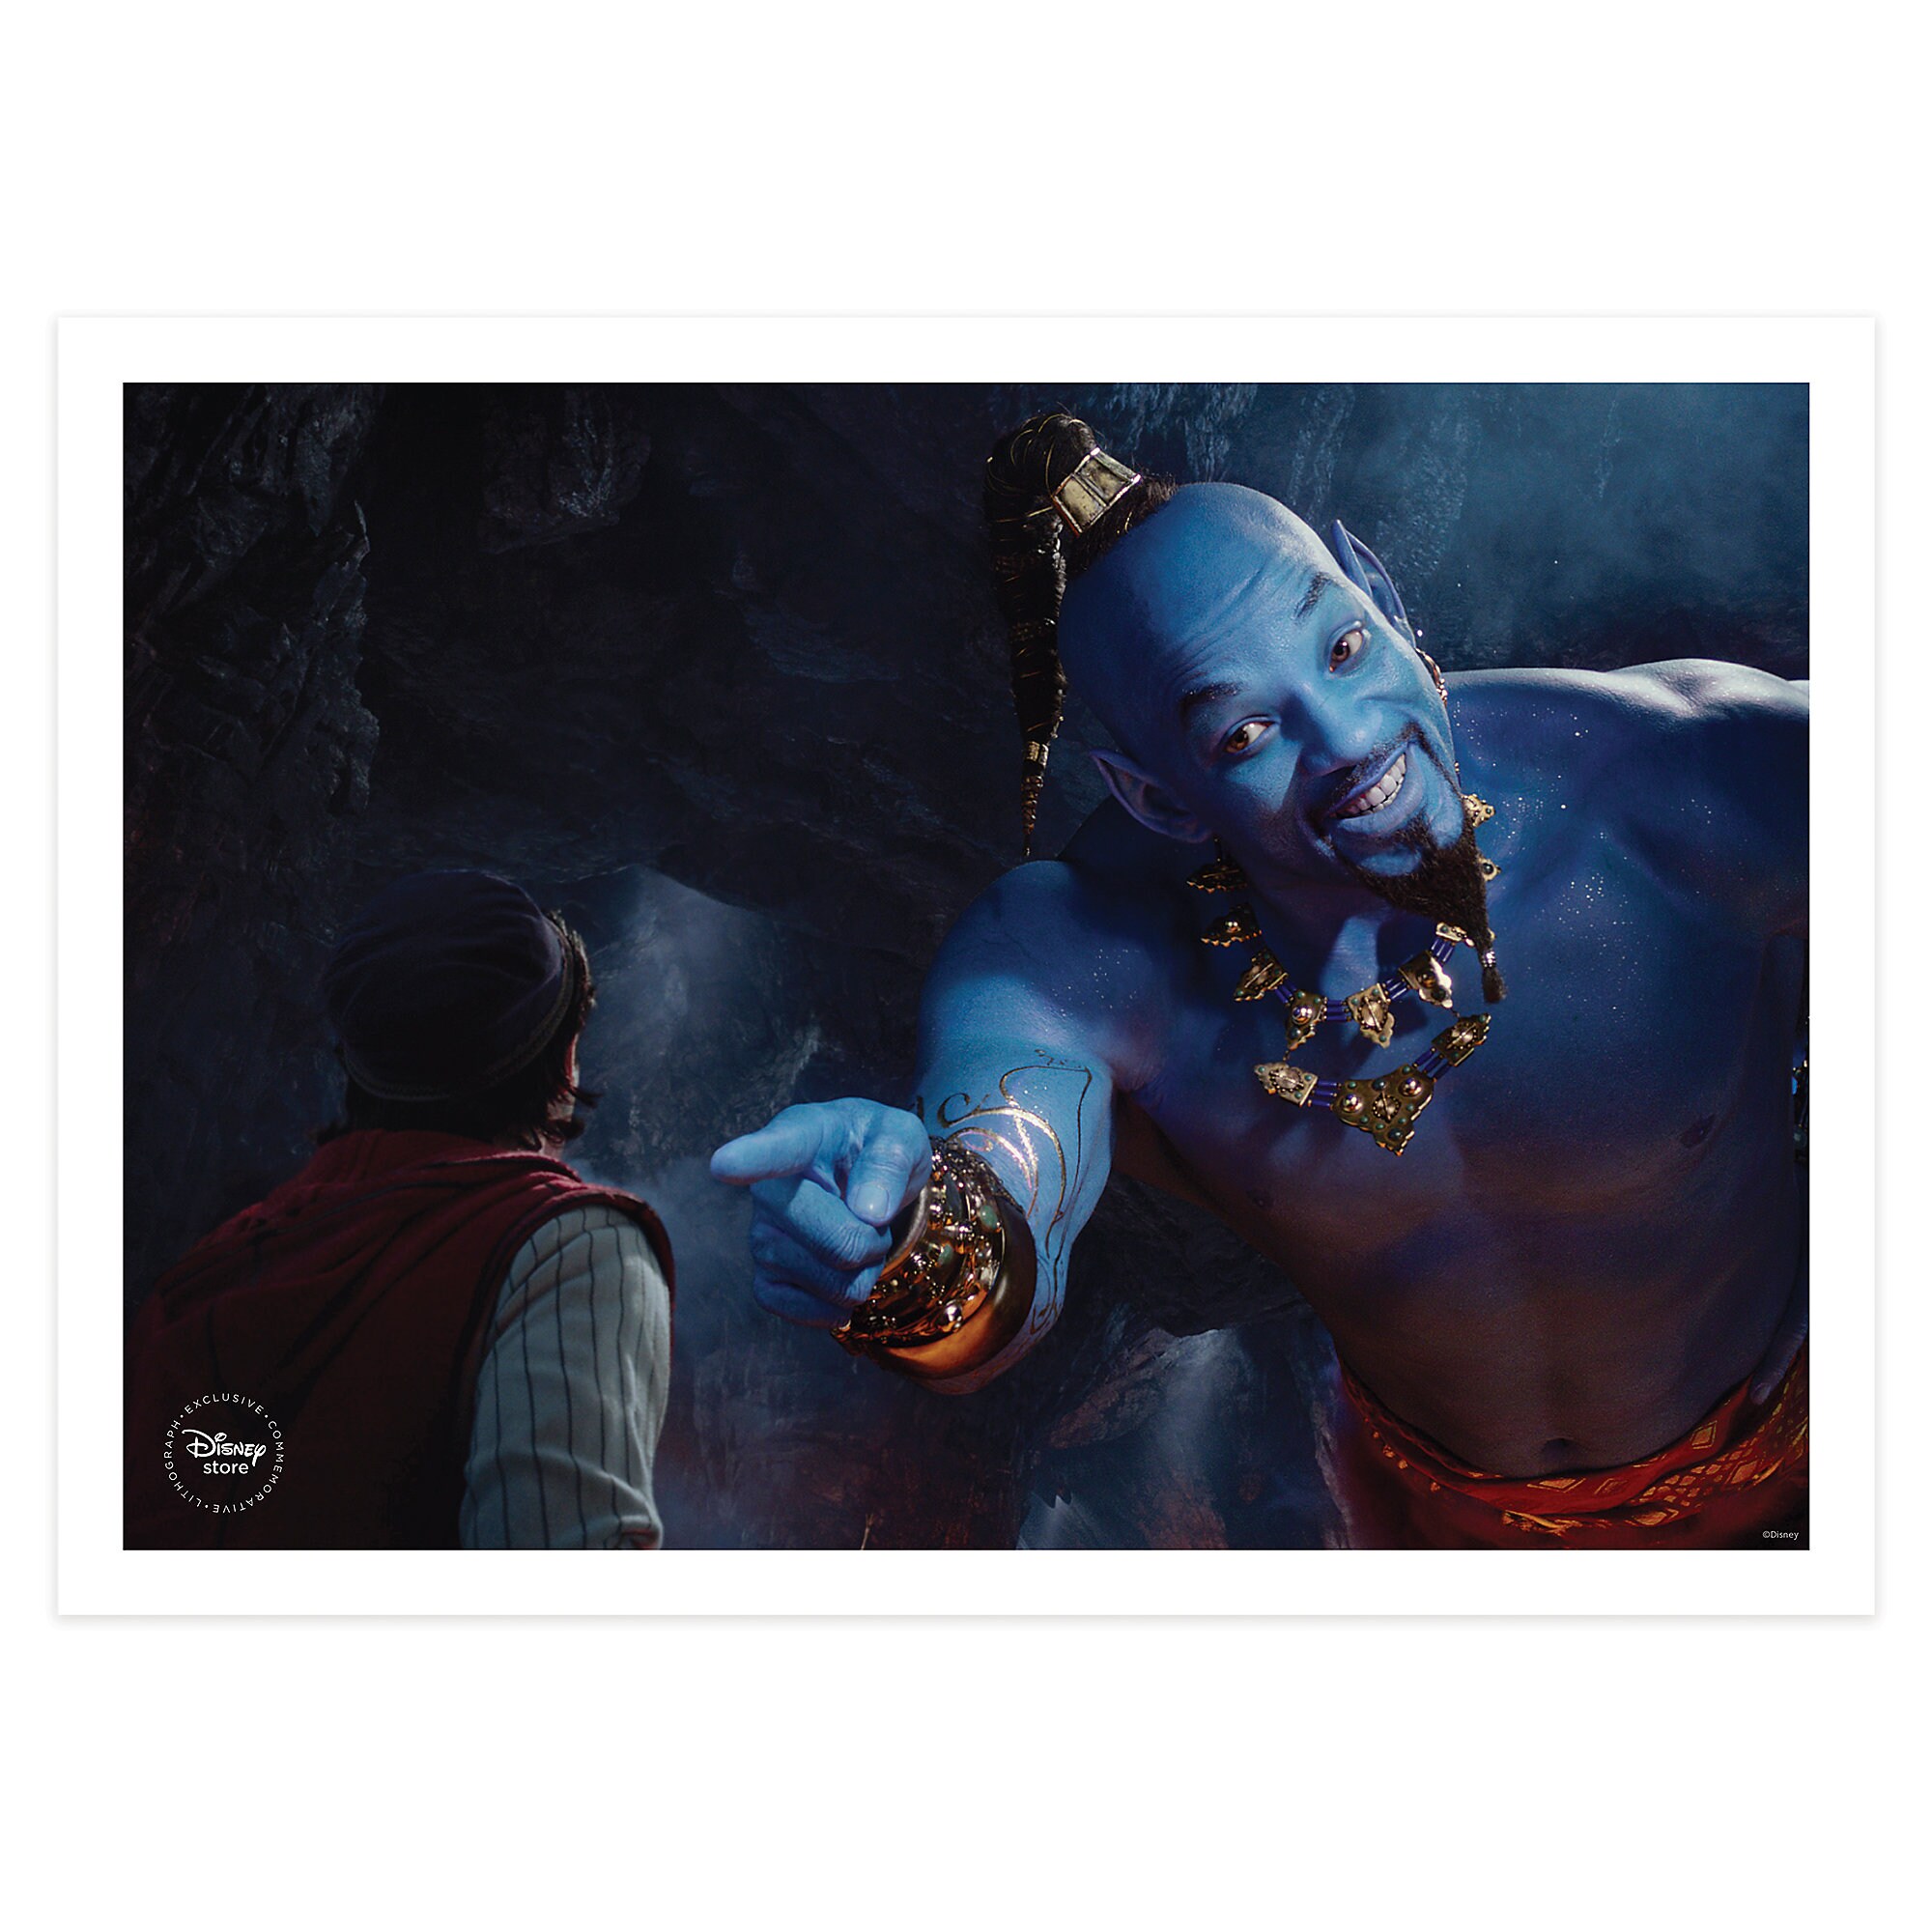 Aladdin Live Action Film Blu-ray Combo Pack Multi-Screen Edition with FREE Lithograph Set Offer - Pre-Order